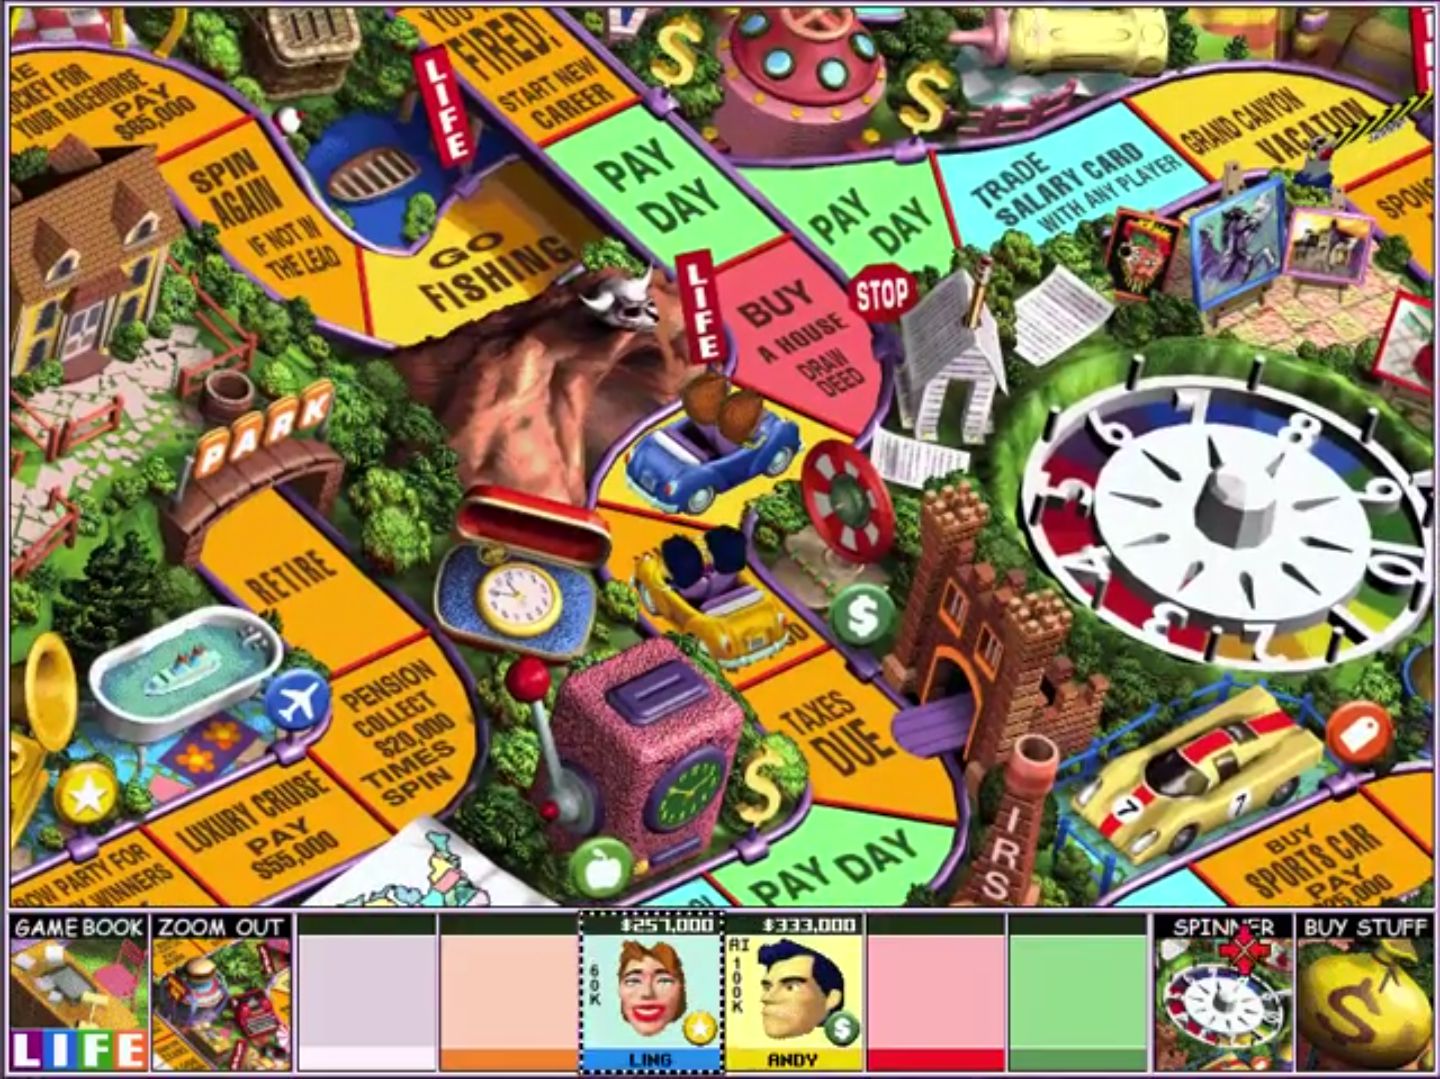 the game of life pc free download full version